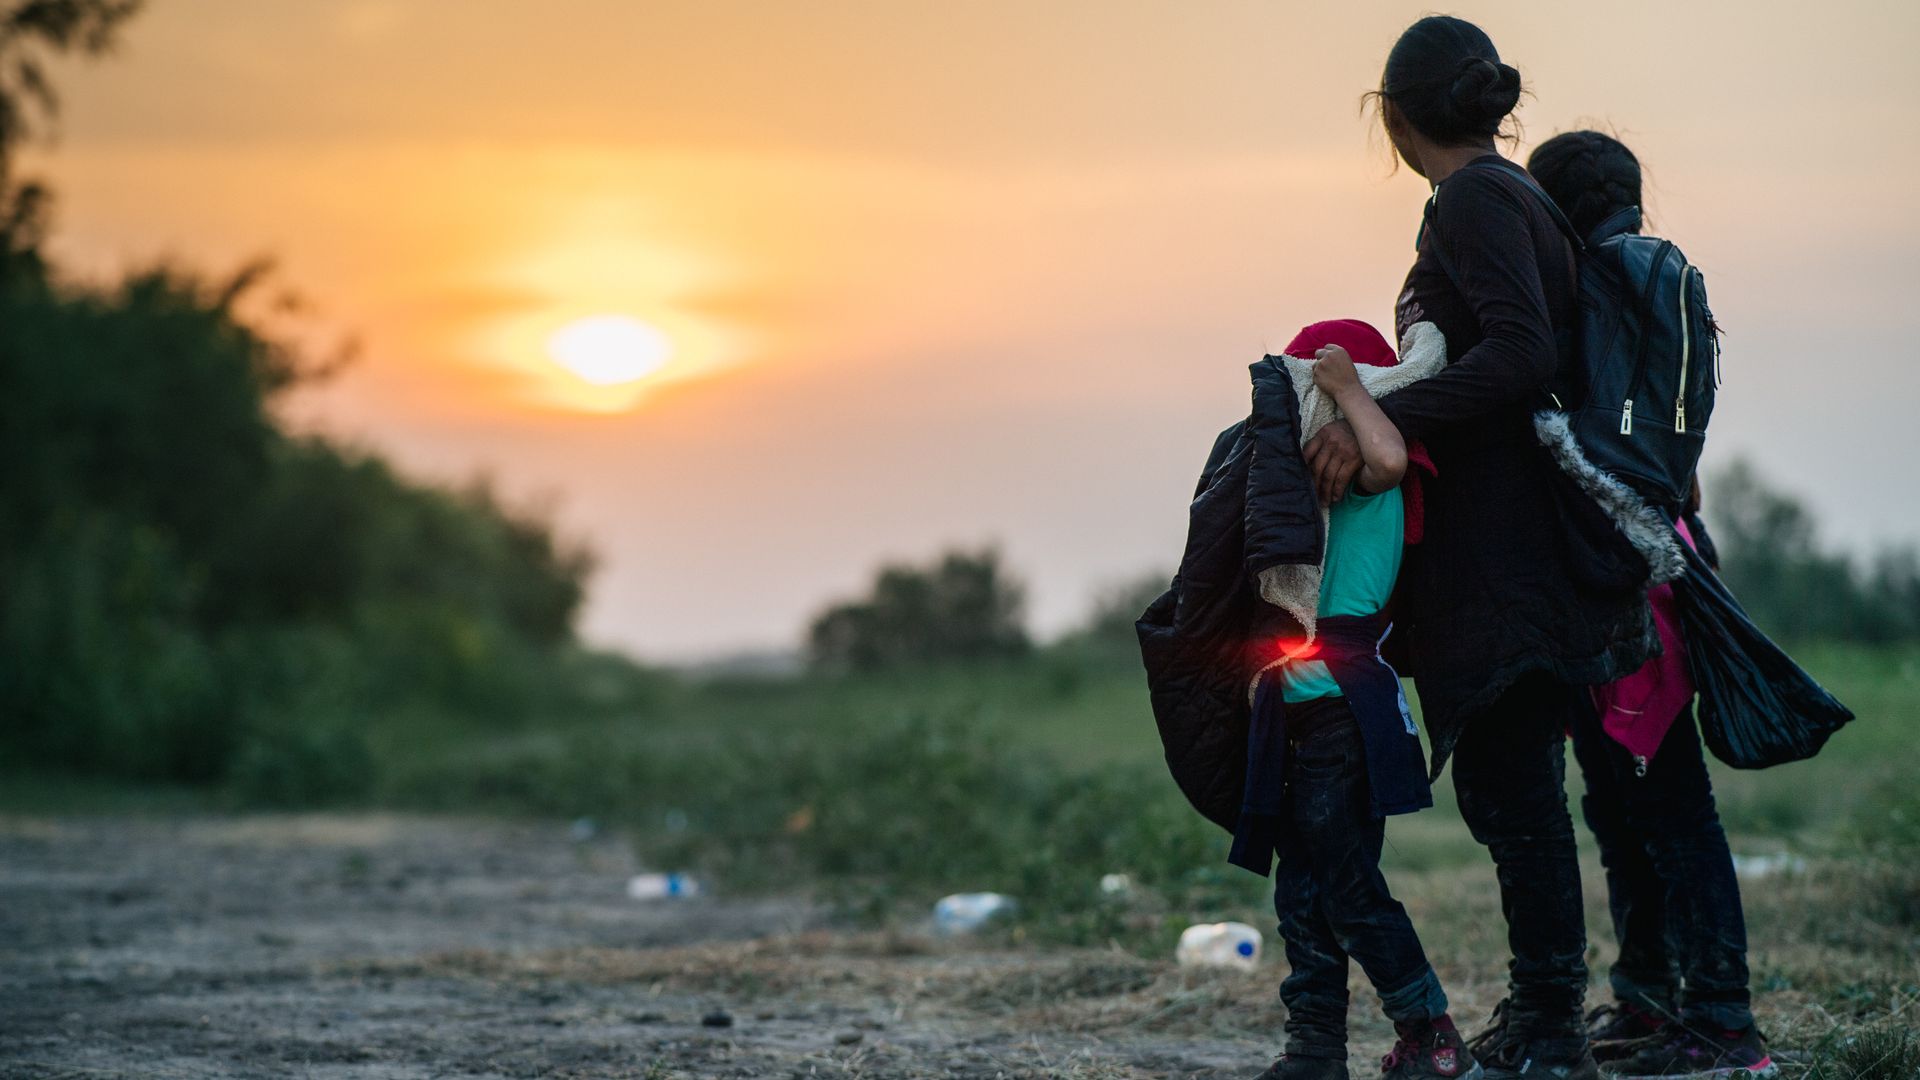 A migrant family is seen looking at the setting sun while awaiting processing at the U.S.-Mexico border.